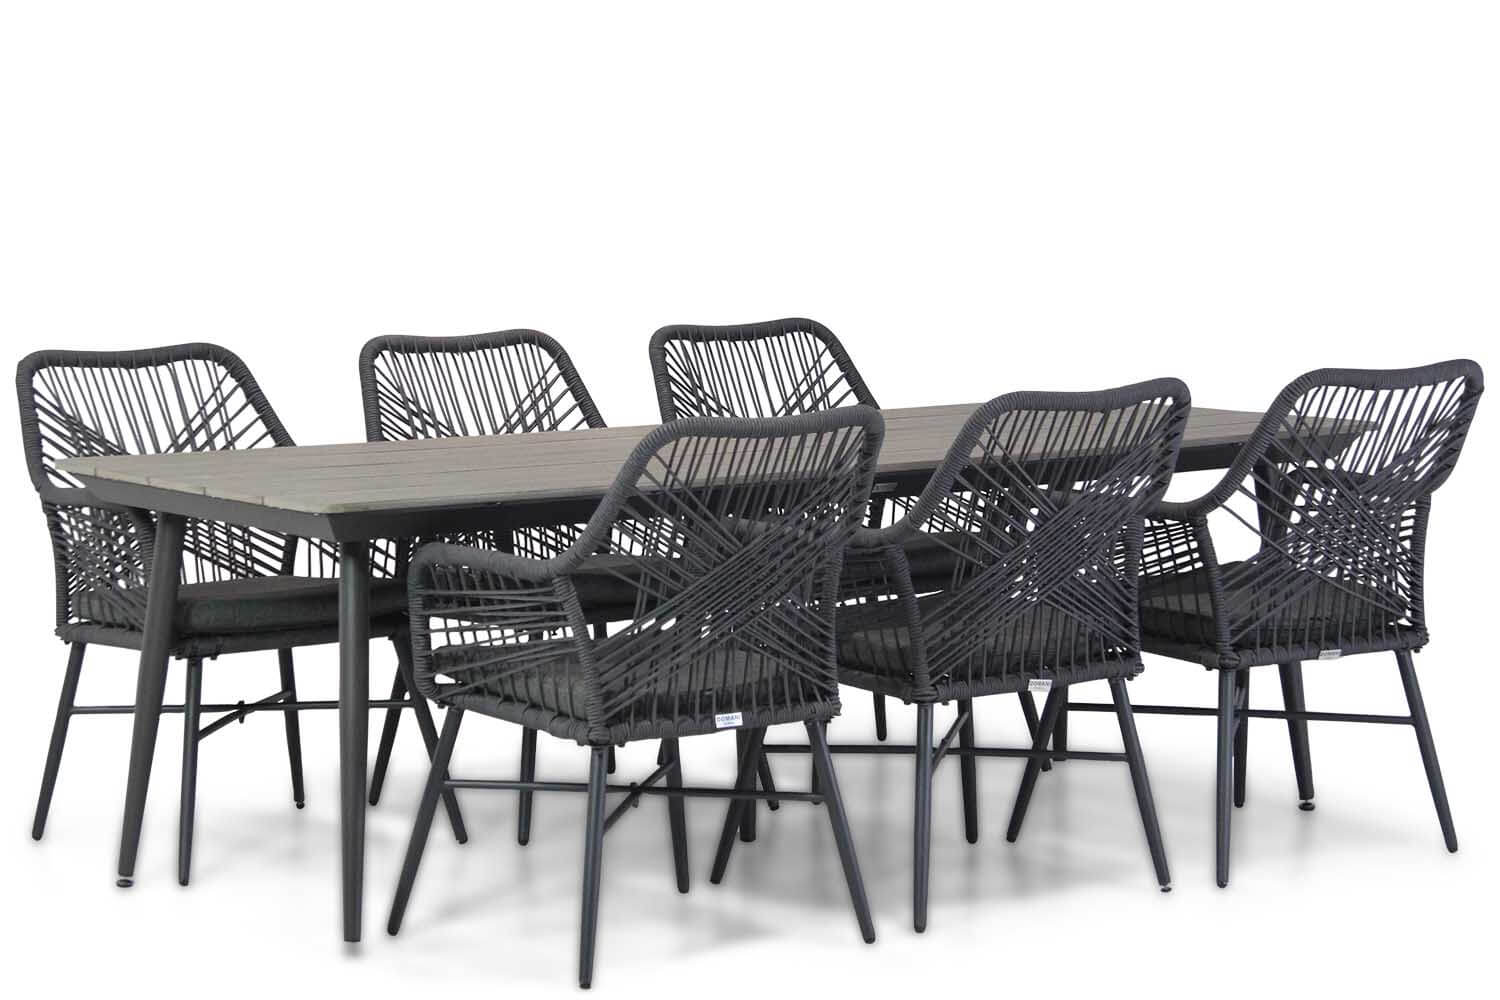 tuinset forisantra matale240 7 delig - Domani Foris/Matale 240 cm dining tuinset 7-delig